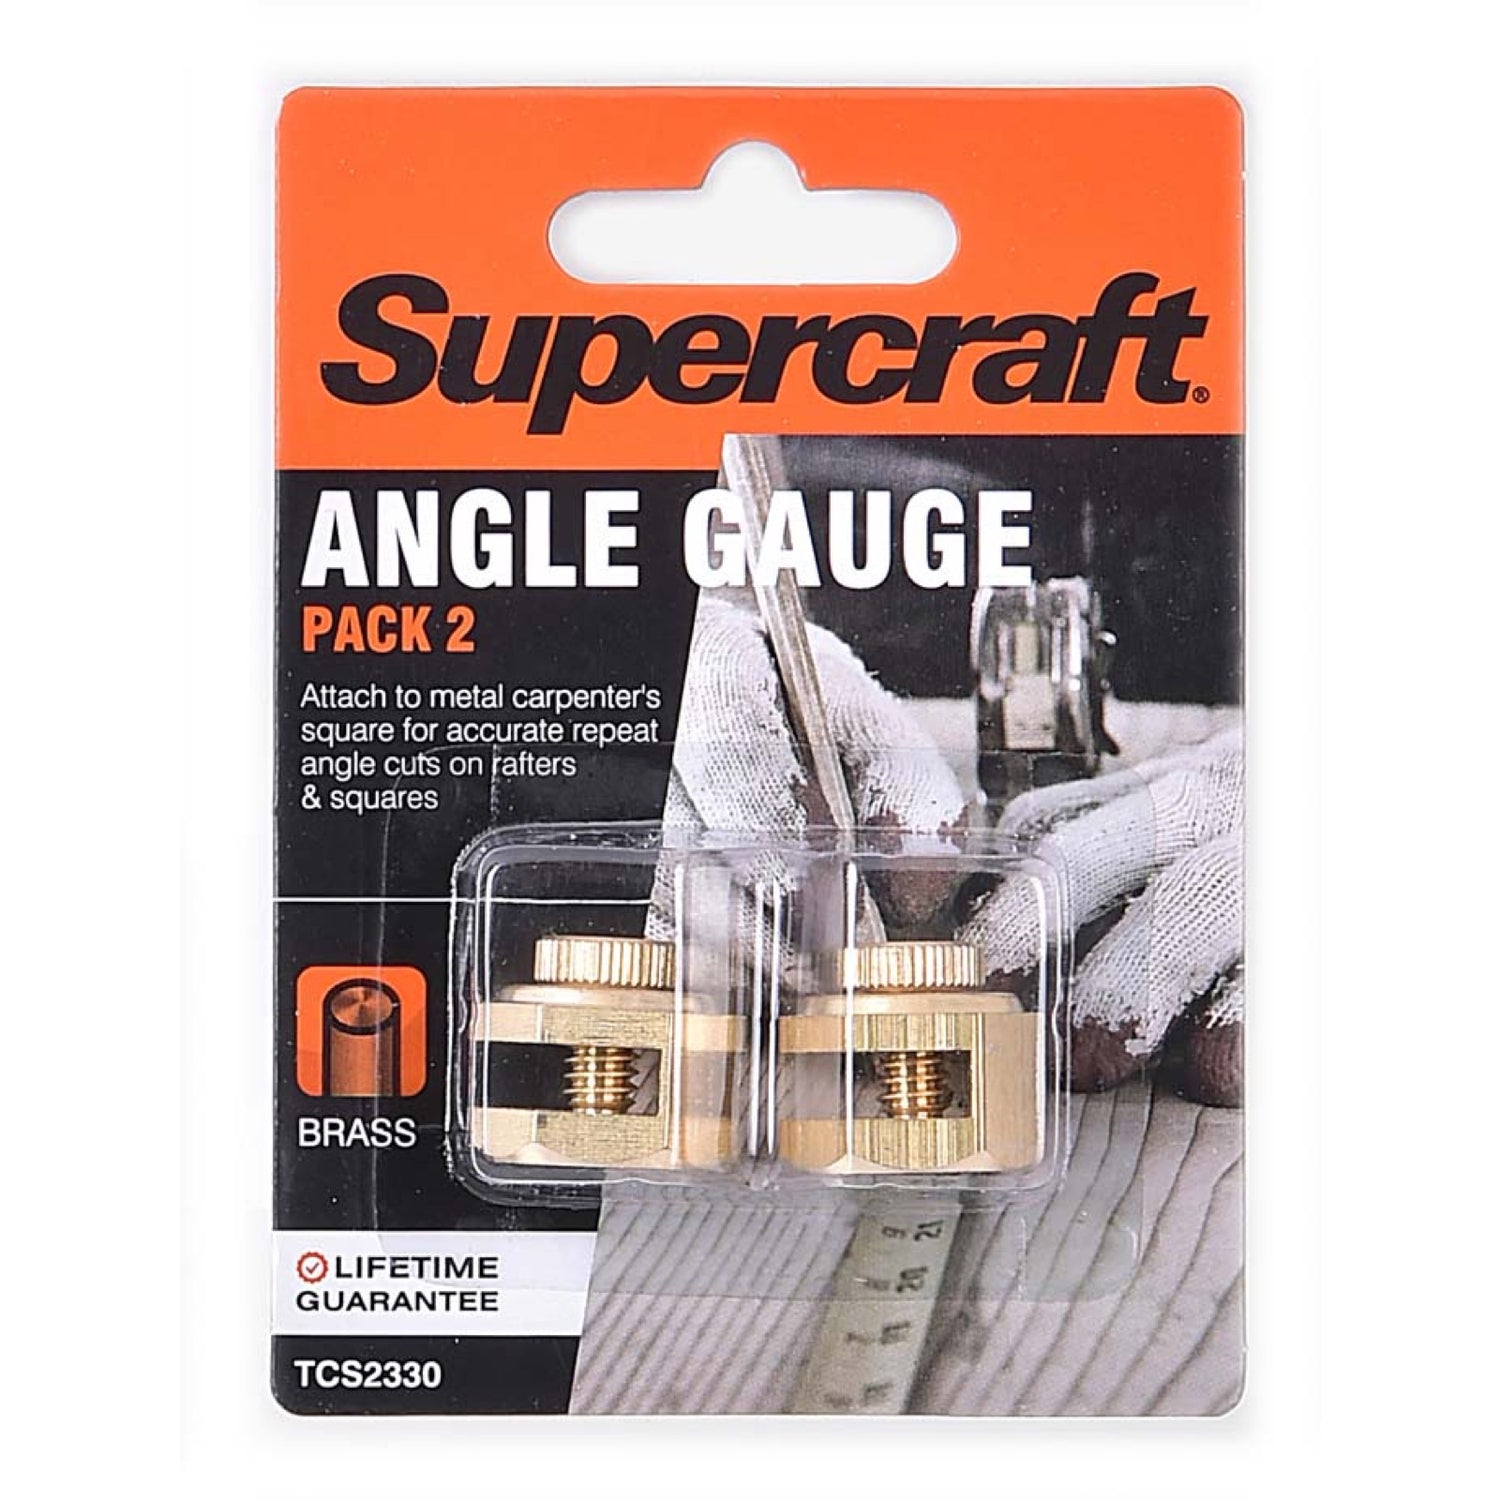 Supercraft 2-Pack Gauge Staircase